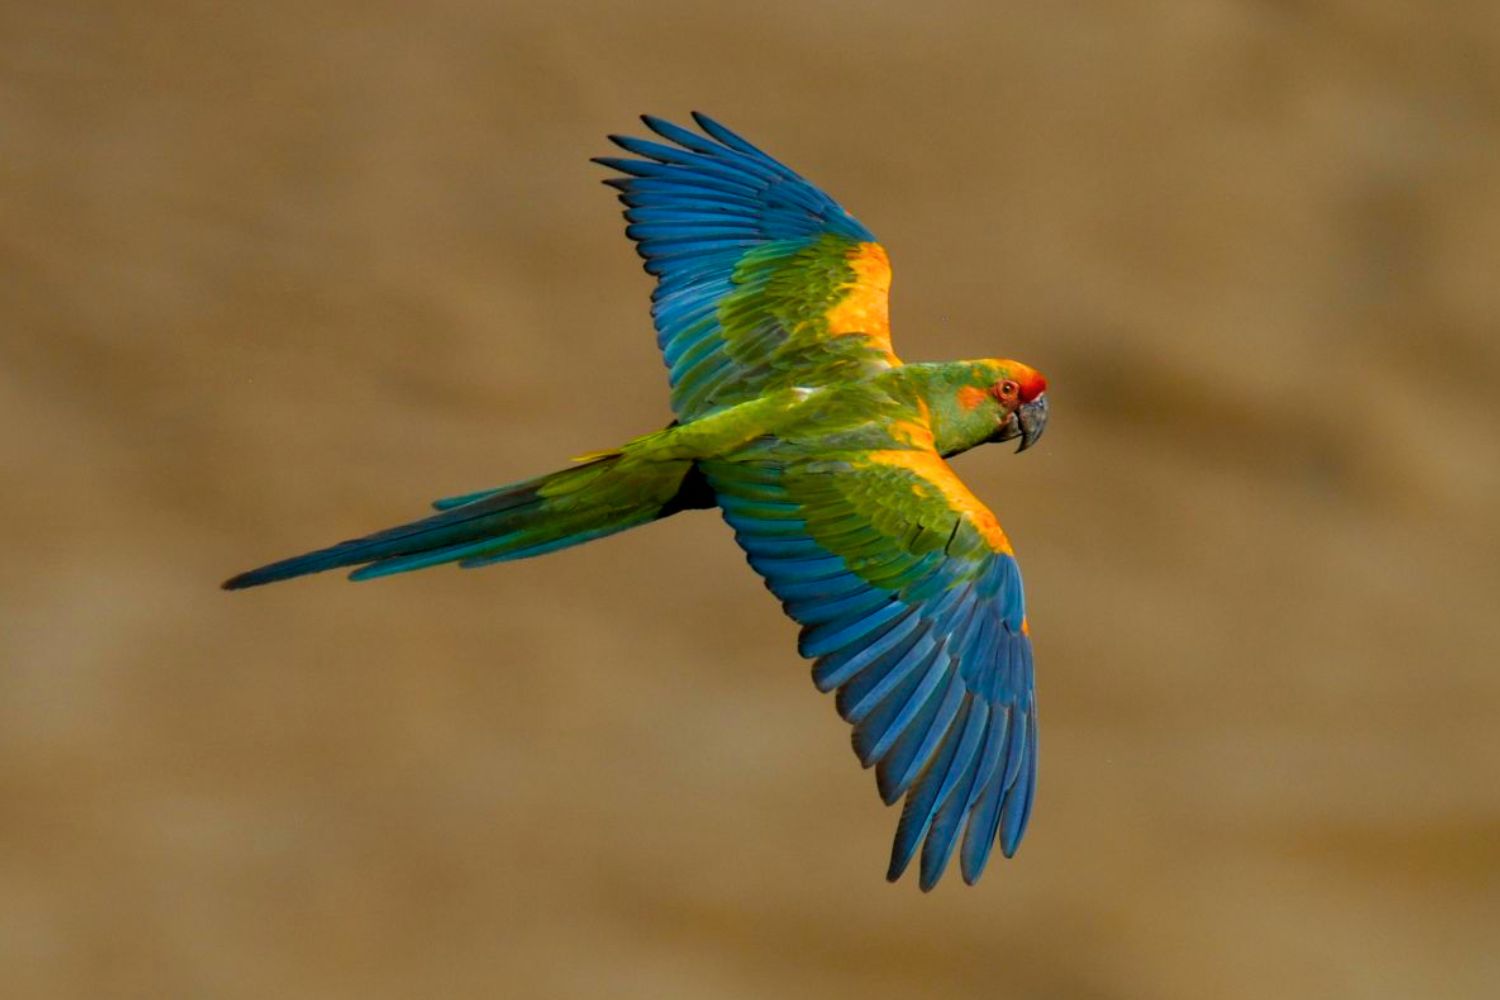 9. Almost all macaw species are either threatened, critically endangered or extinct